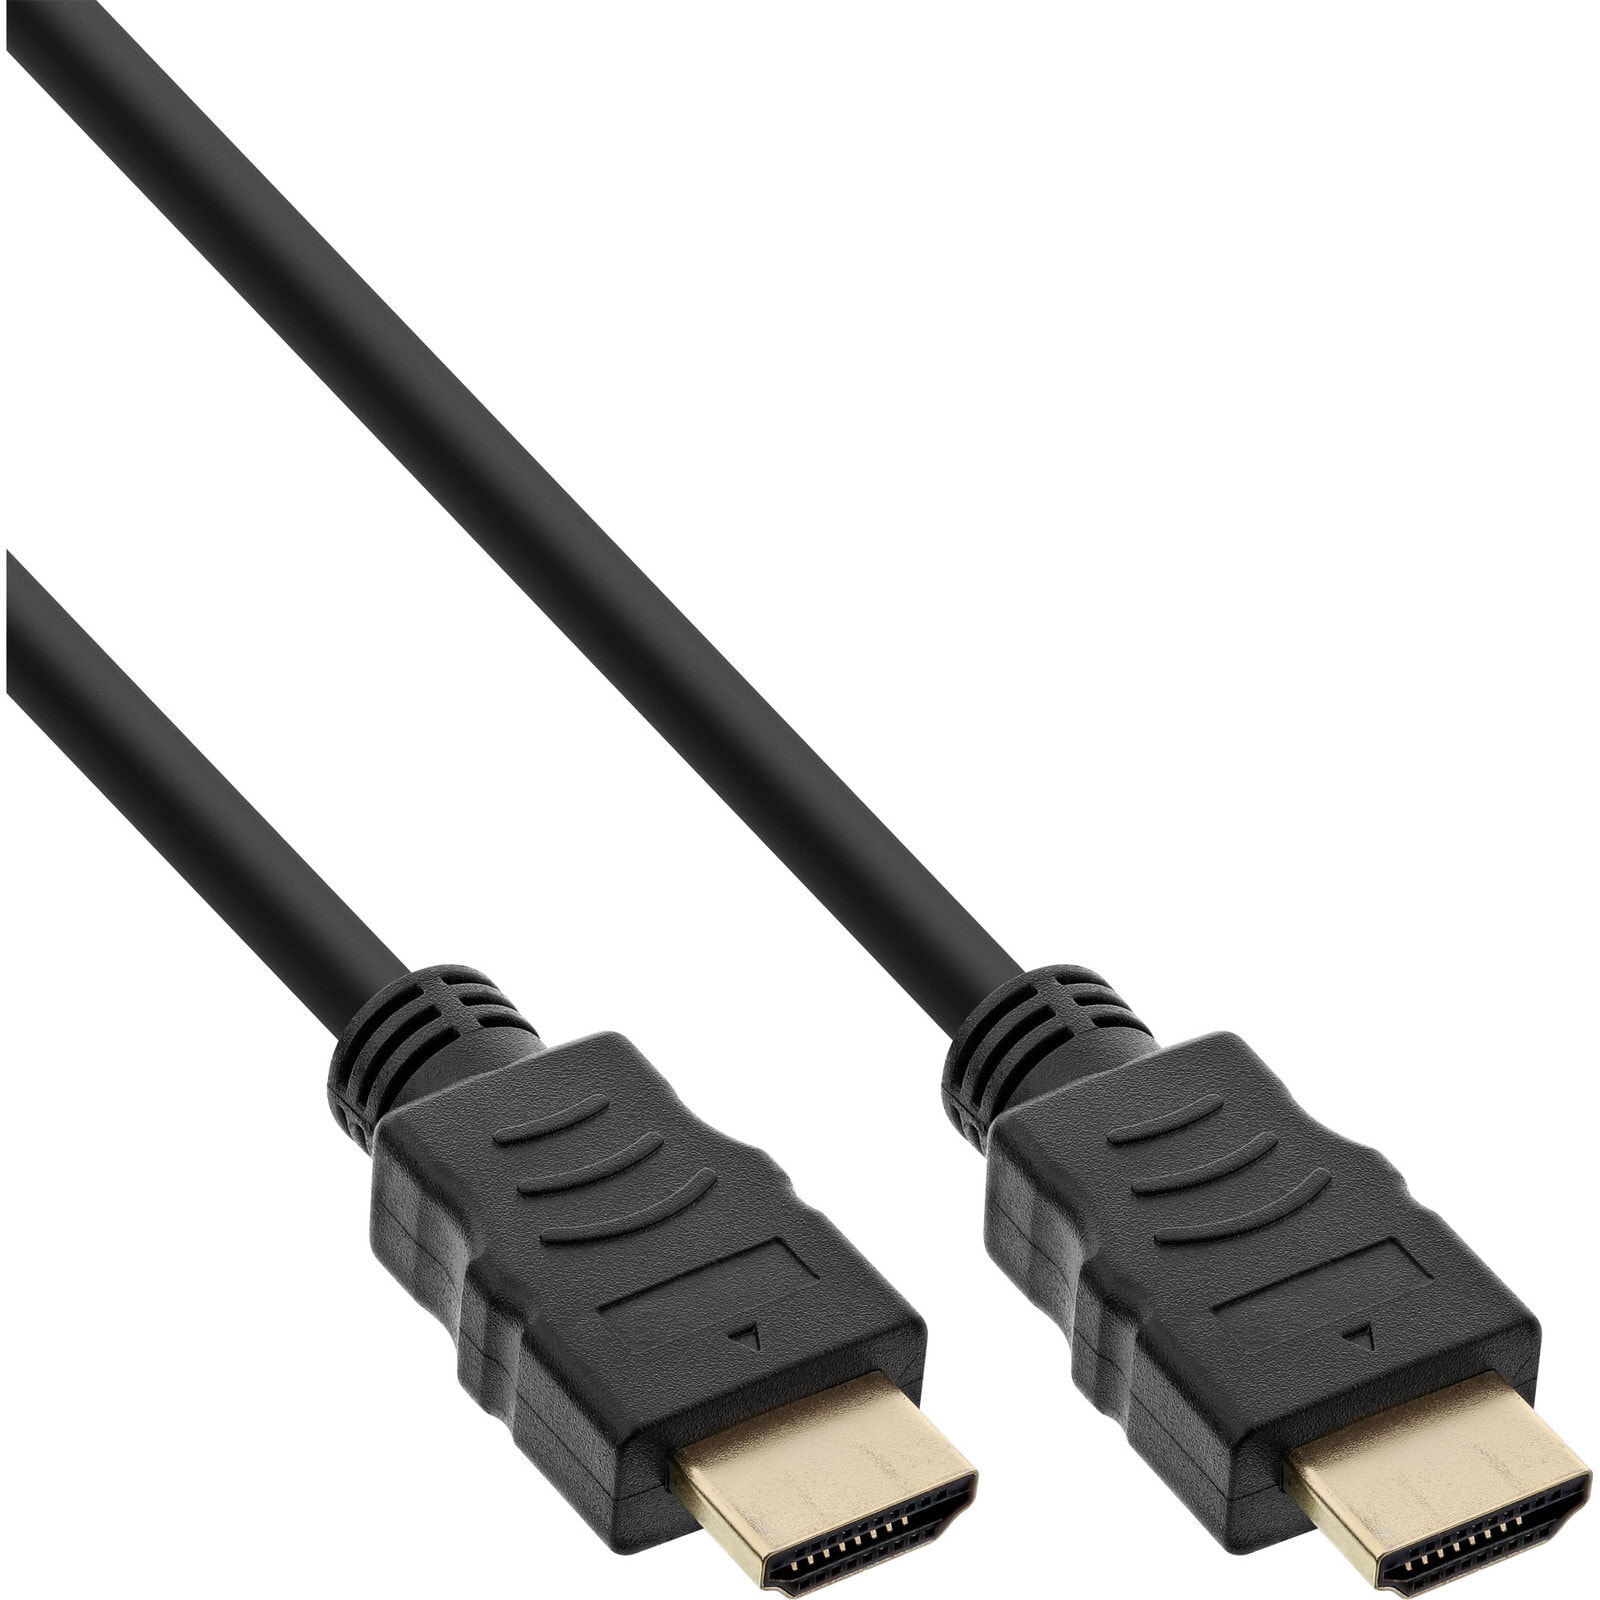 50pcs. Bulk-Pack HDMI High Speed Cable with Ethernet male to male 1m